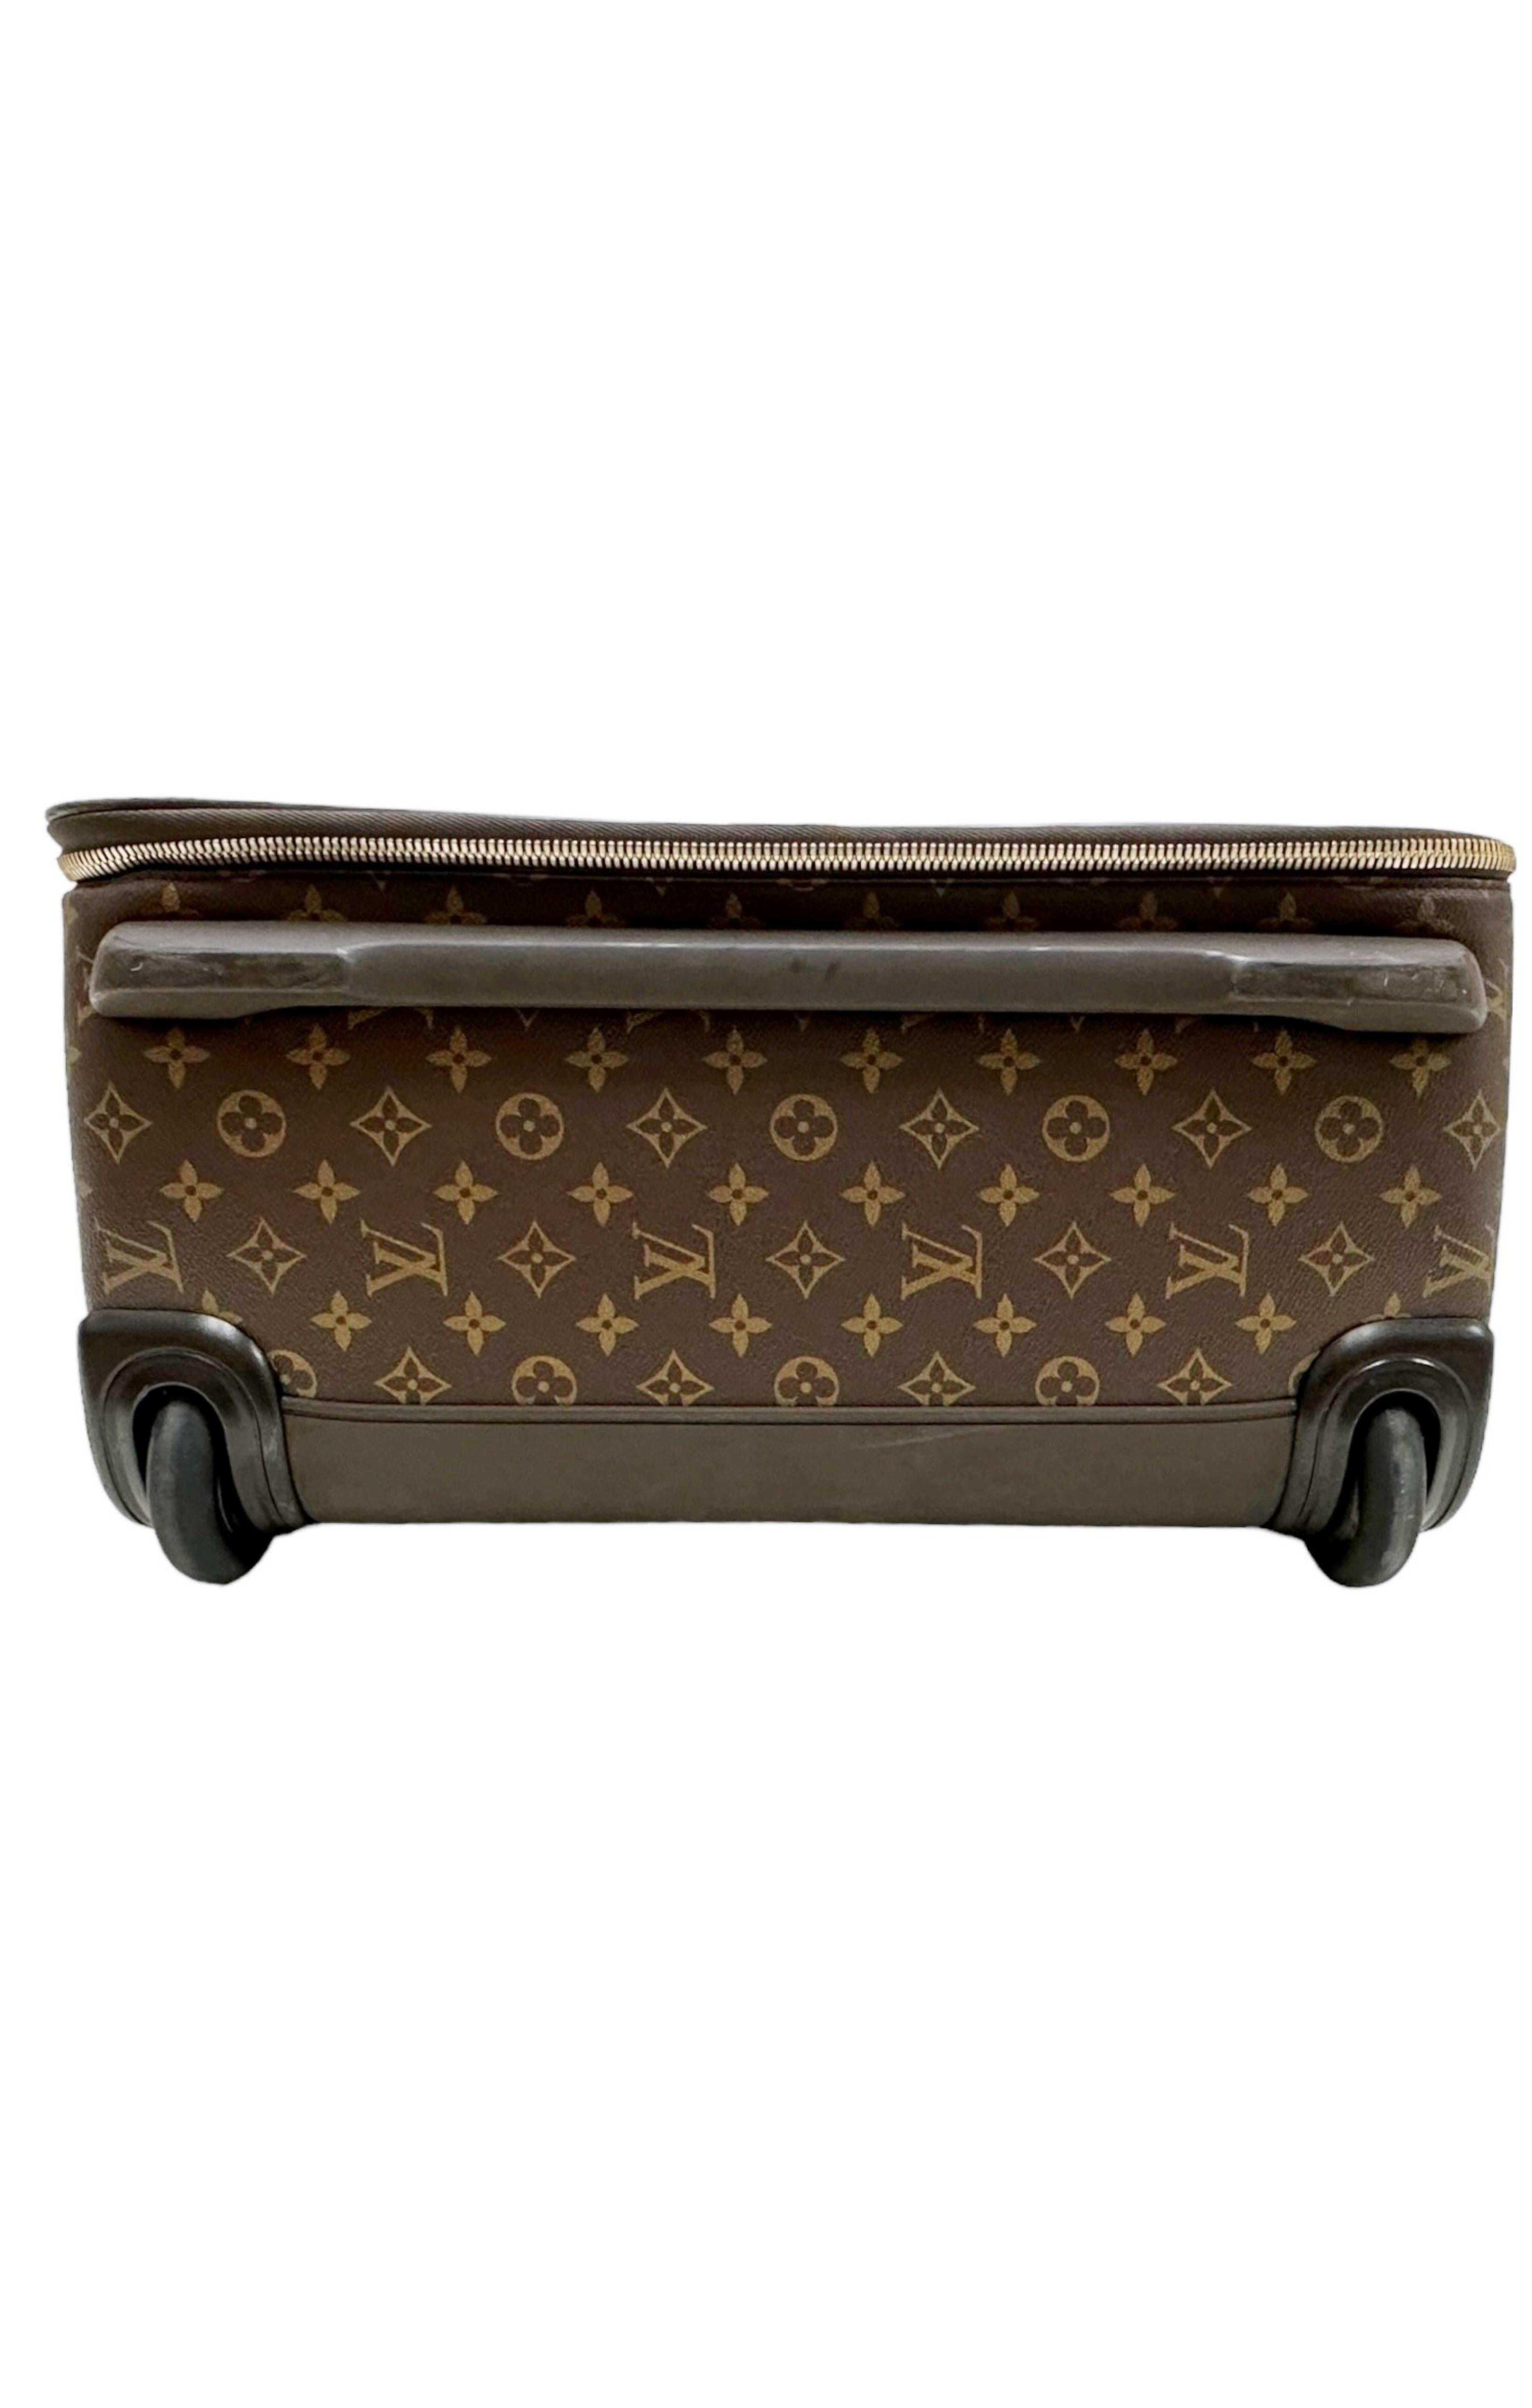 Louis Vuitton Carry-On Bag ''Trolley 45'' Monogram size H17 x W13 x D7 in